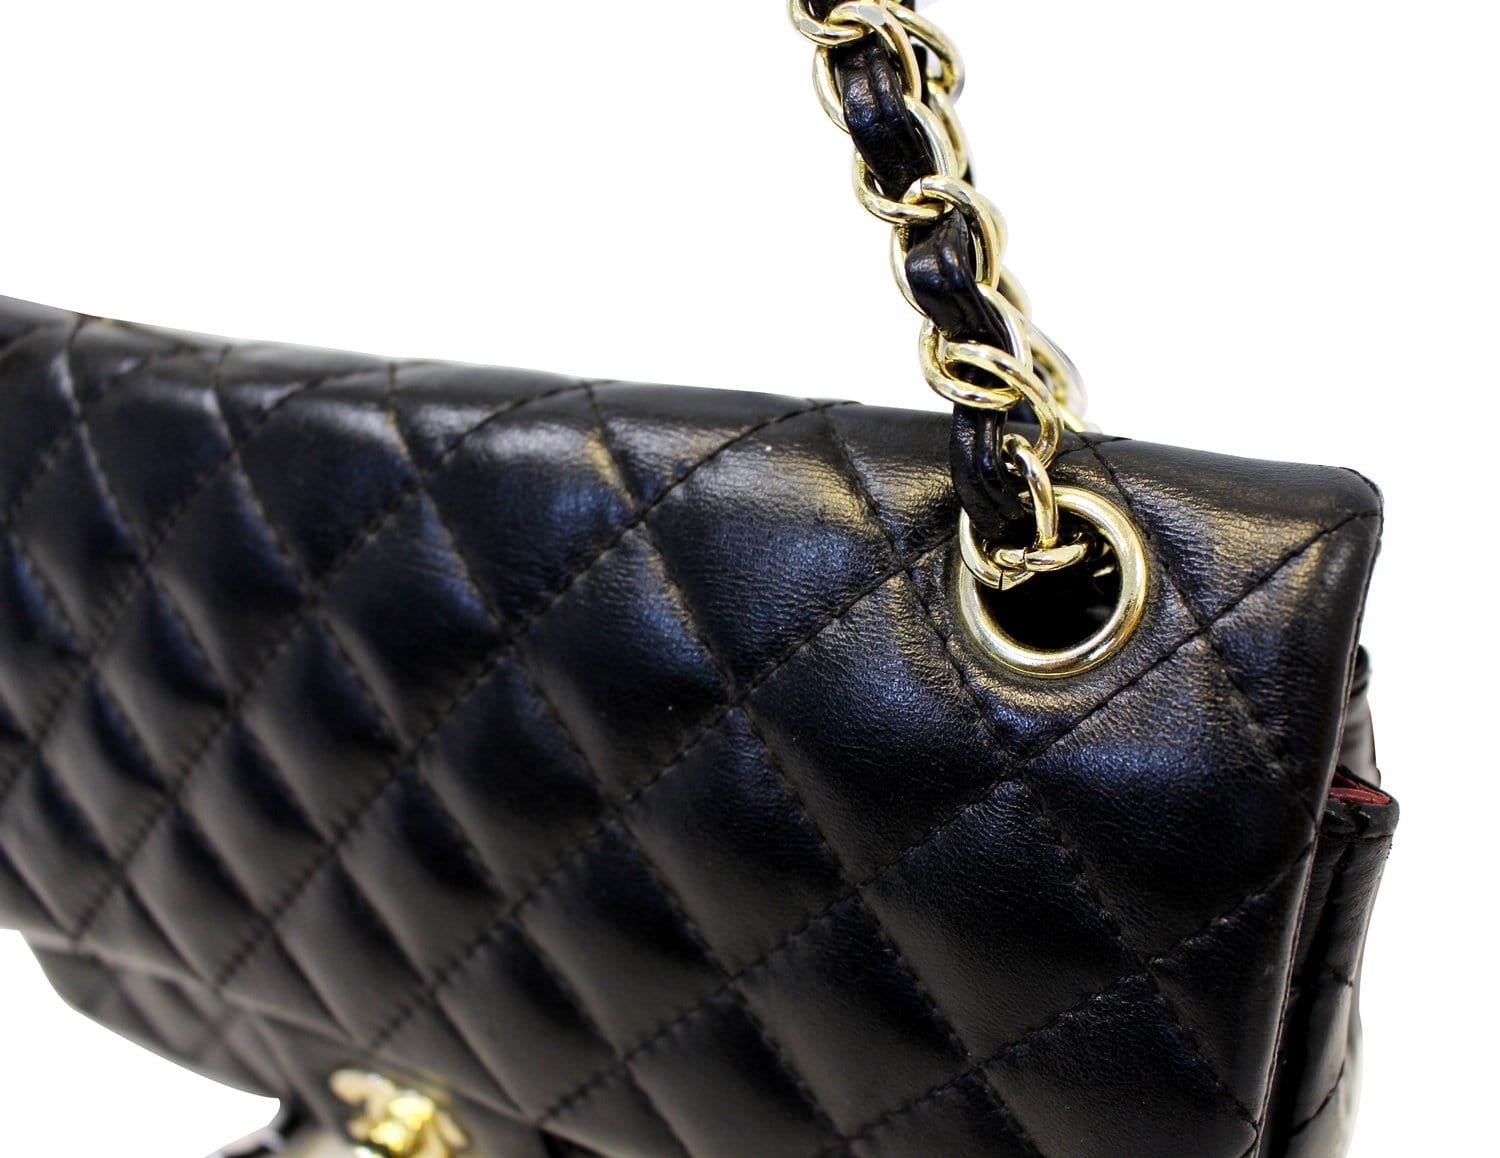 Chanel Black Quilted Patent Leather New Classic Double Flap Jumbo  Q6BAQP27K4008